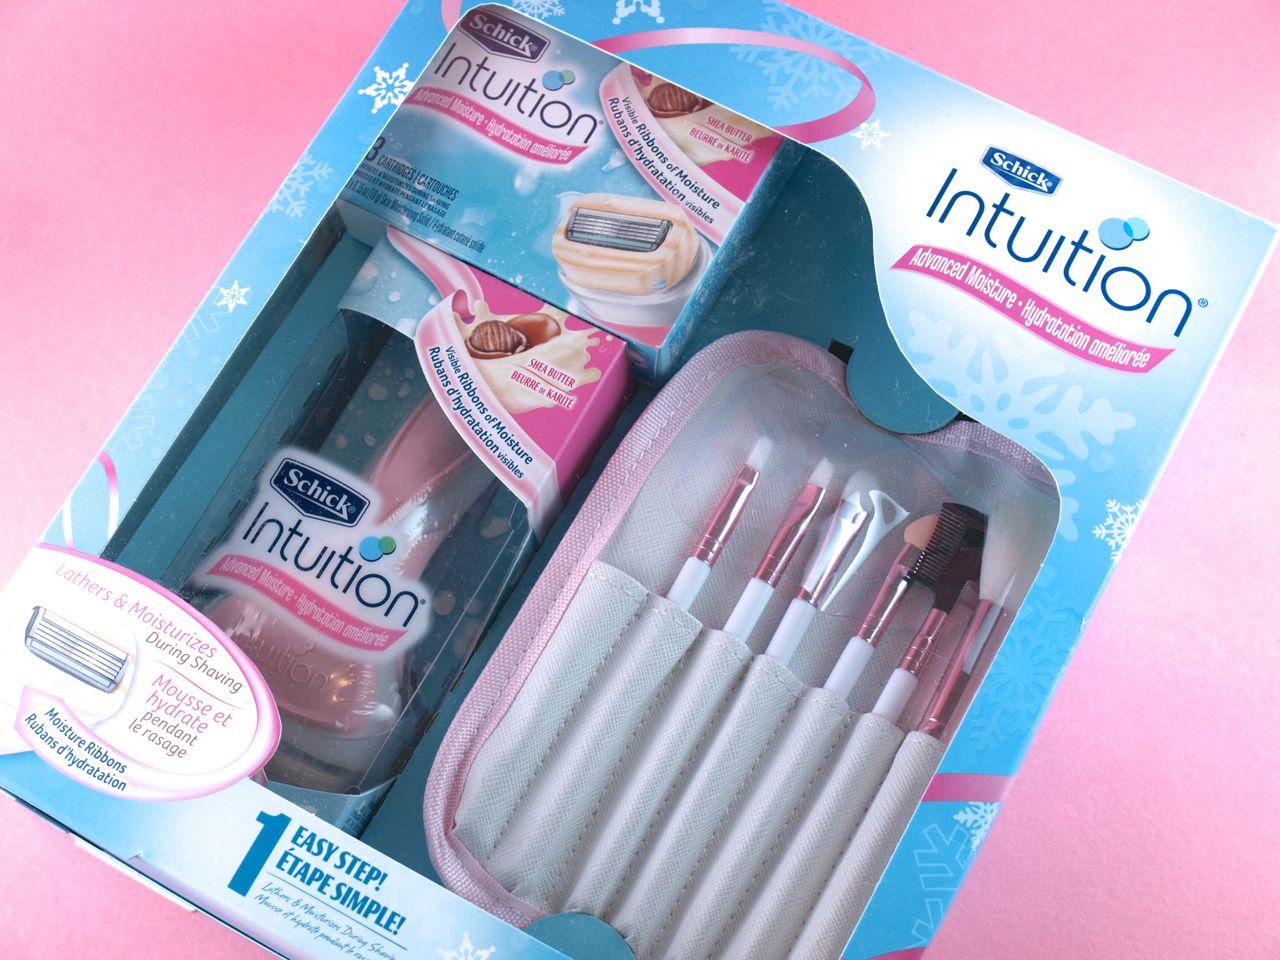 Schick Holiday 2014 Gift Sets: Review